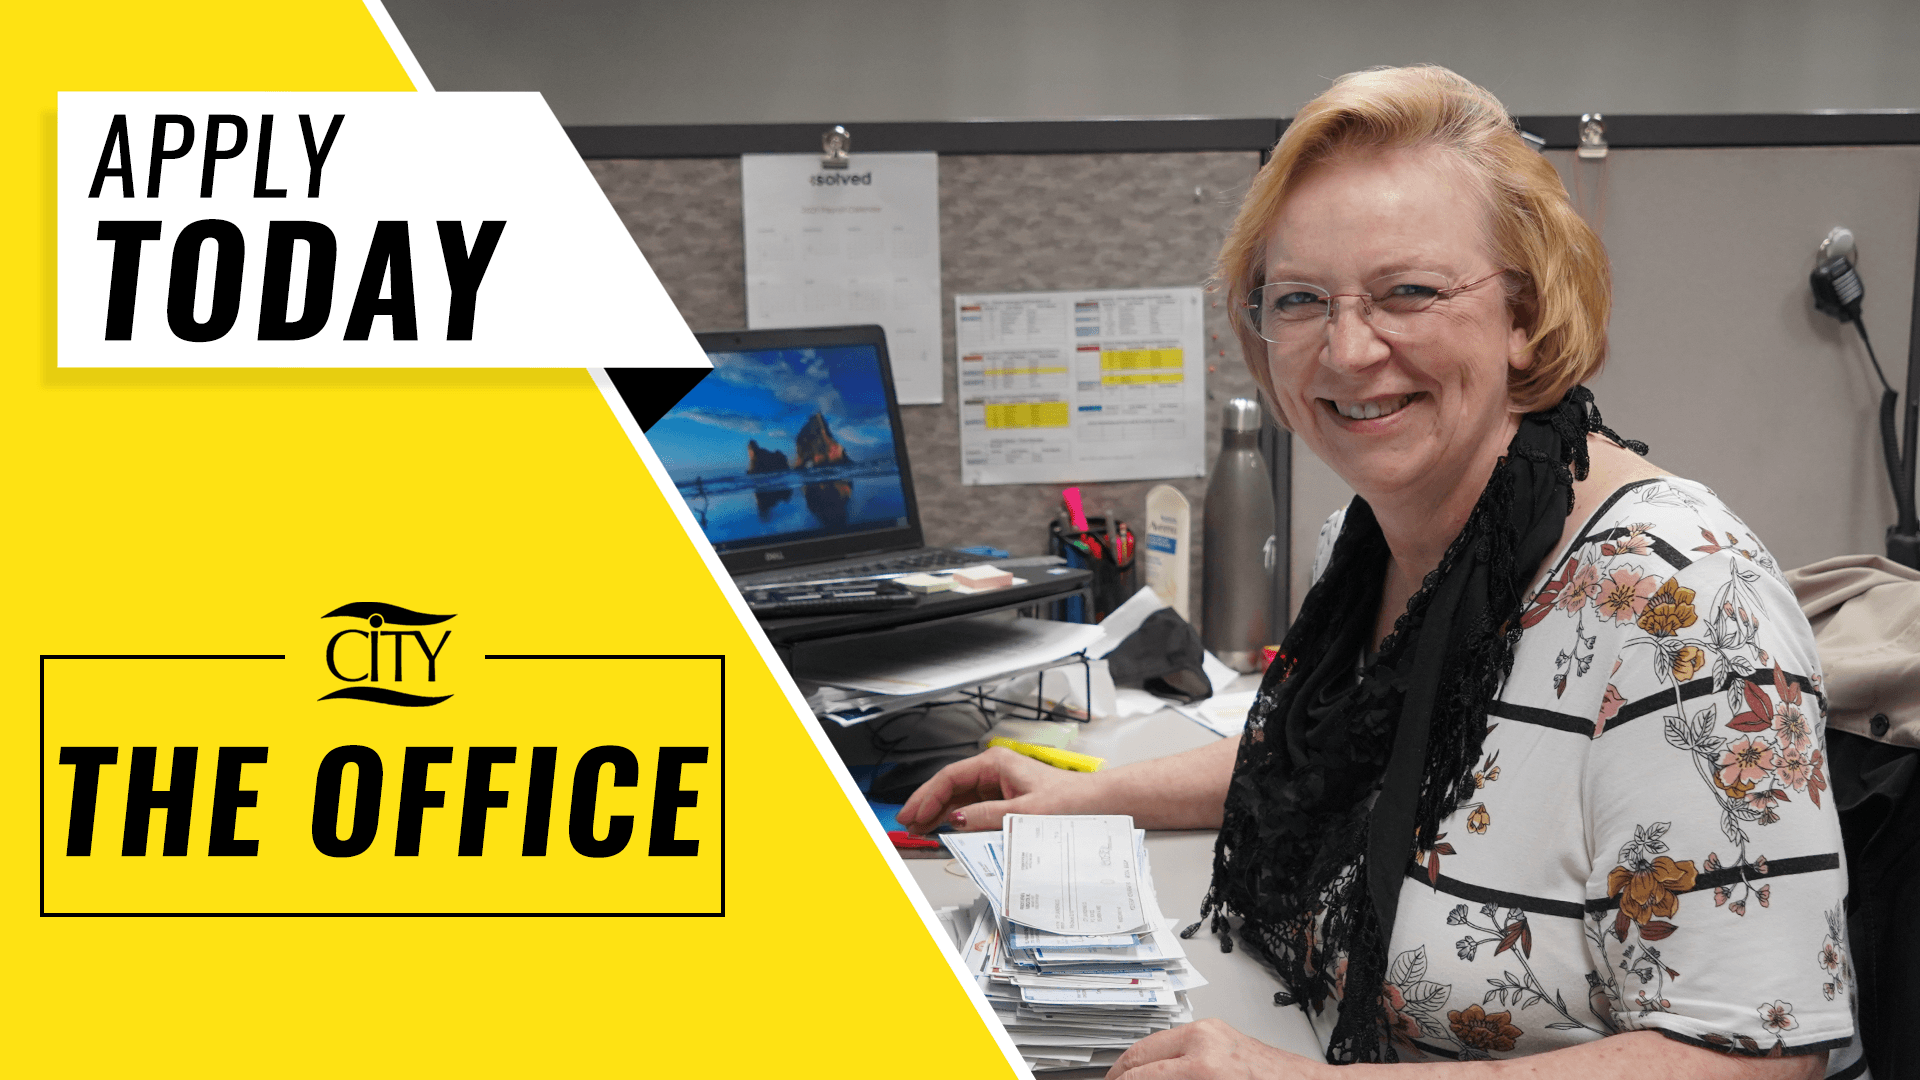 Barb, CITY's Accounting Supervisor, smiling for a picture at her desk in a CITY recruiting advertisement